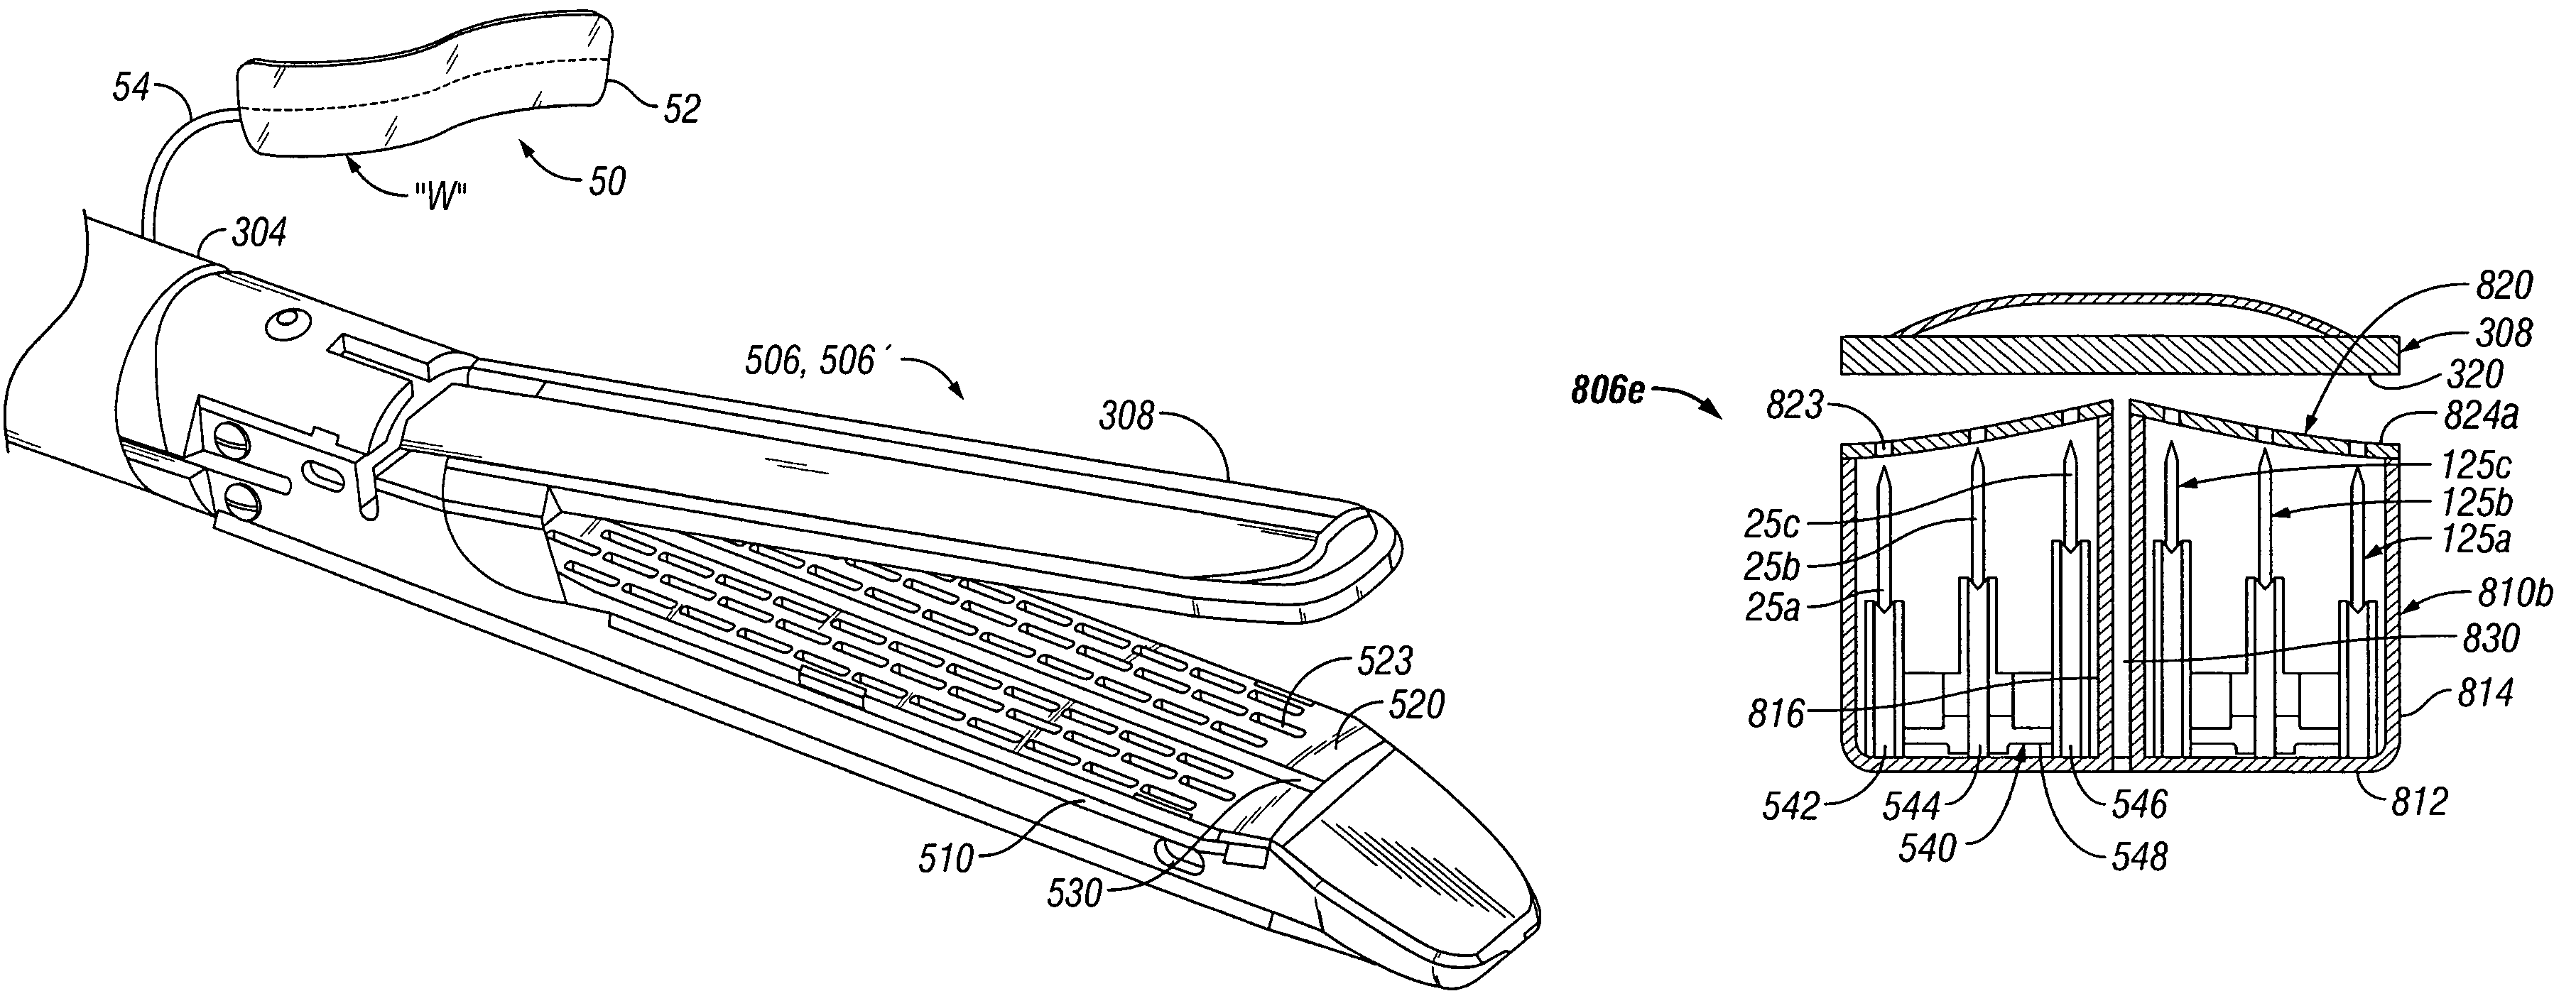 Surgical stapling instruments including a cartridge having multiple staple sizes